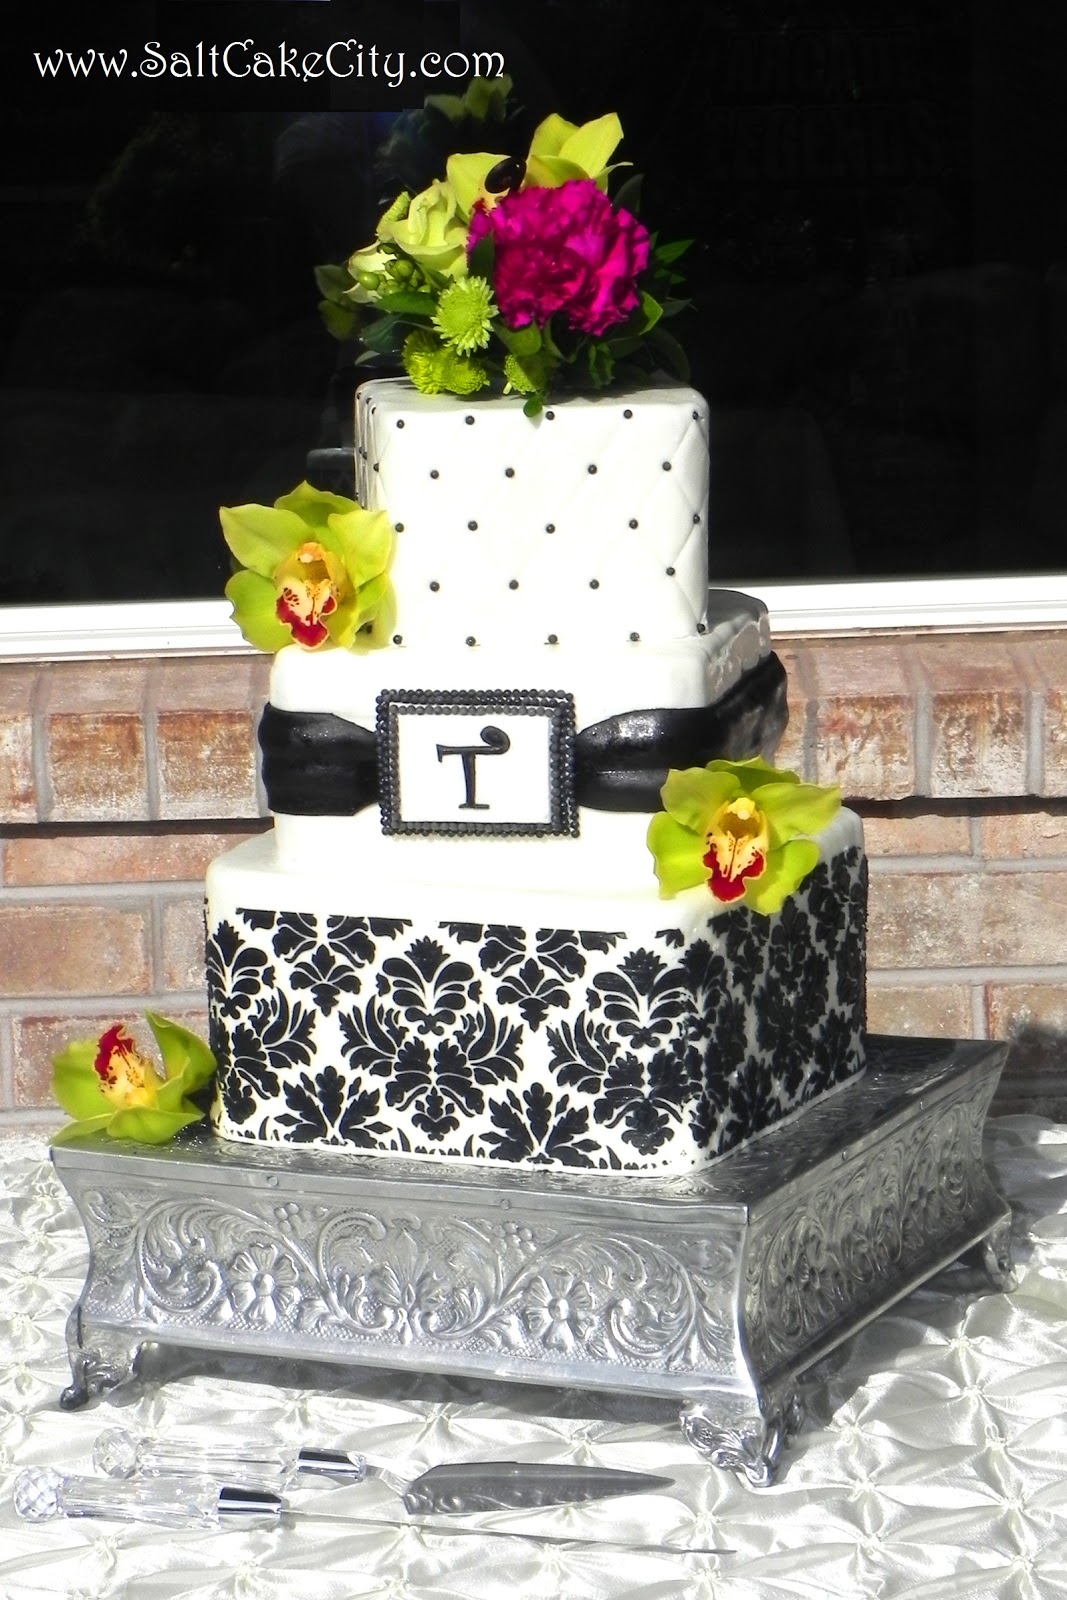 really cool wedding cakes Posted by Jennifer at 11:48 AM 0comments Links to this post